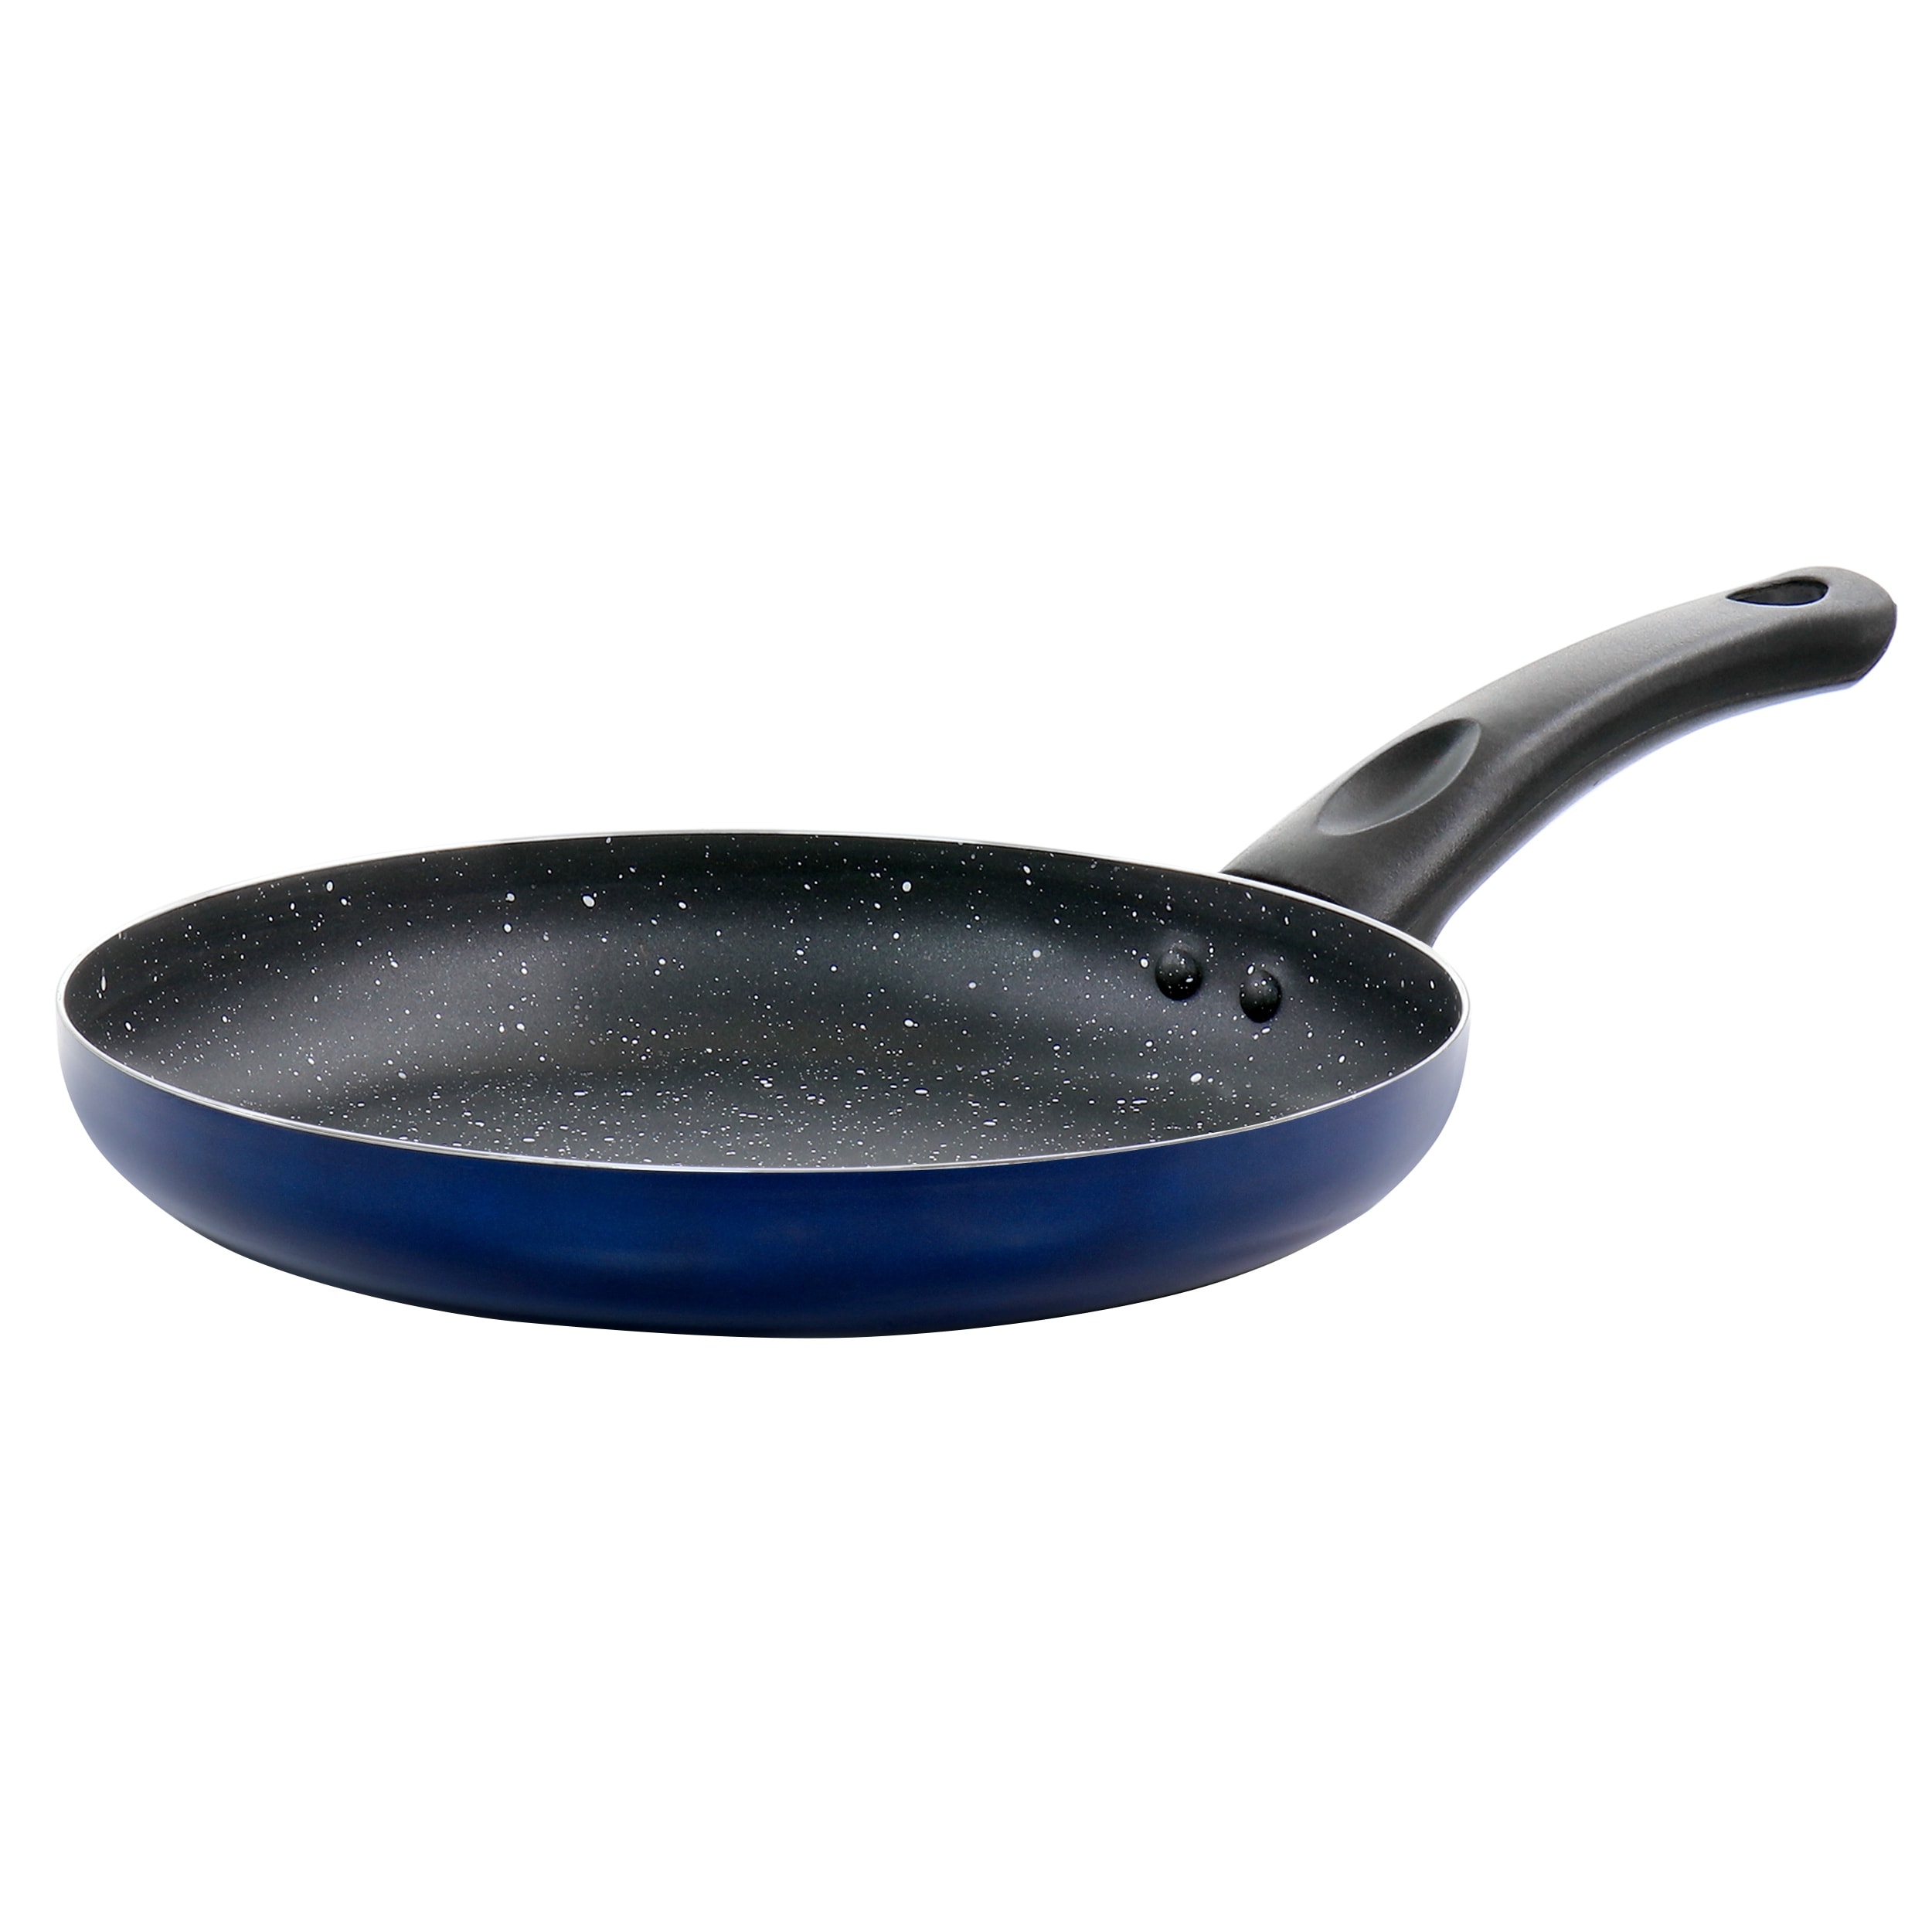 https://ak1.ostkcdn.com/images/products/is/images/direct/bc9277a32a90fc1b38d985ed77a346cc0bee0872/8-Inch-Aluminum-Nonstick-Frying-Pan-in-Blue.jpg